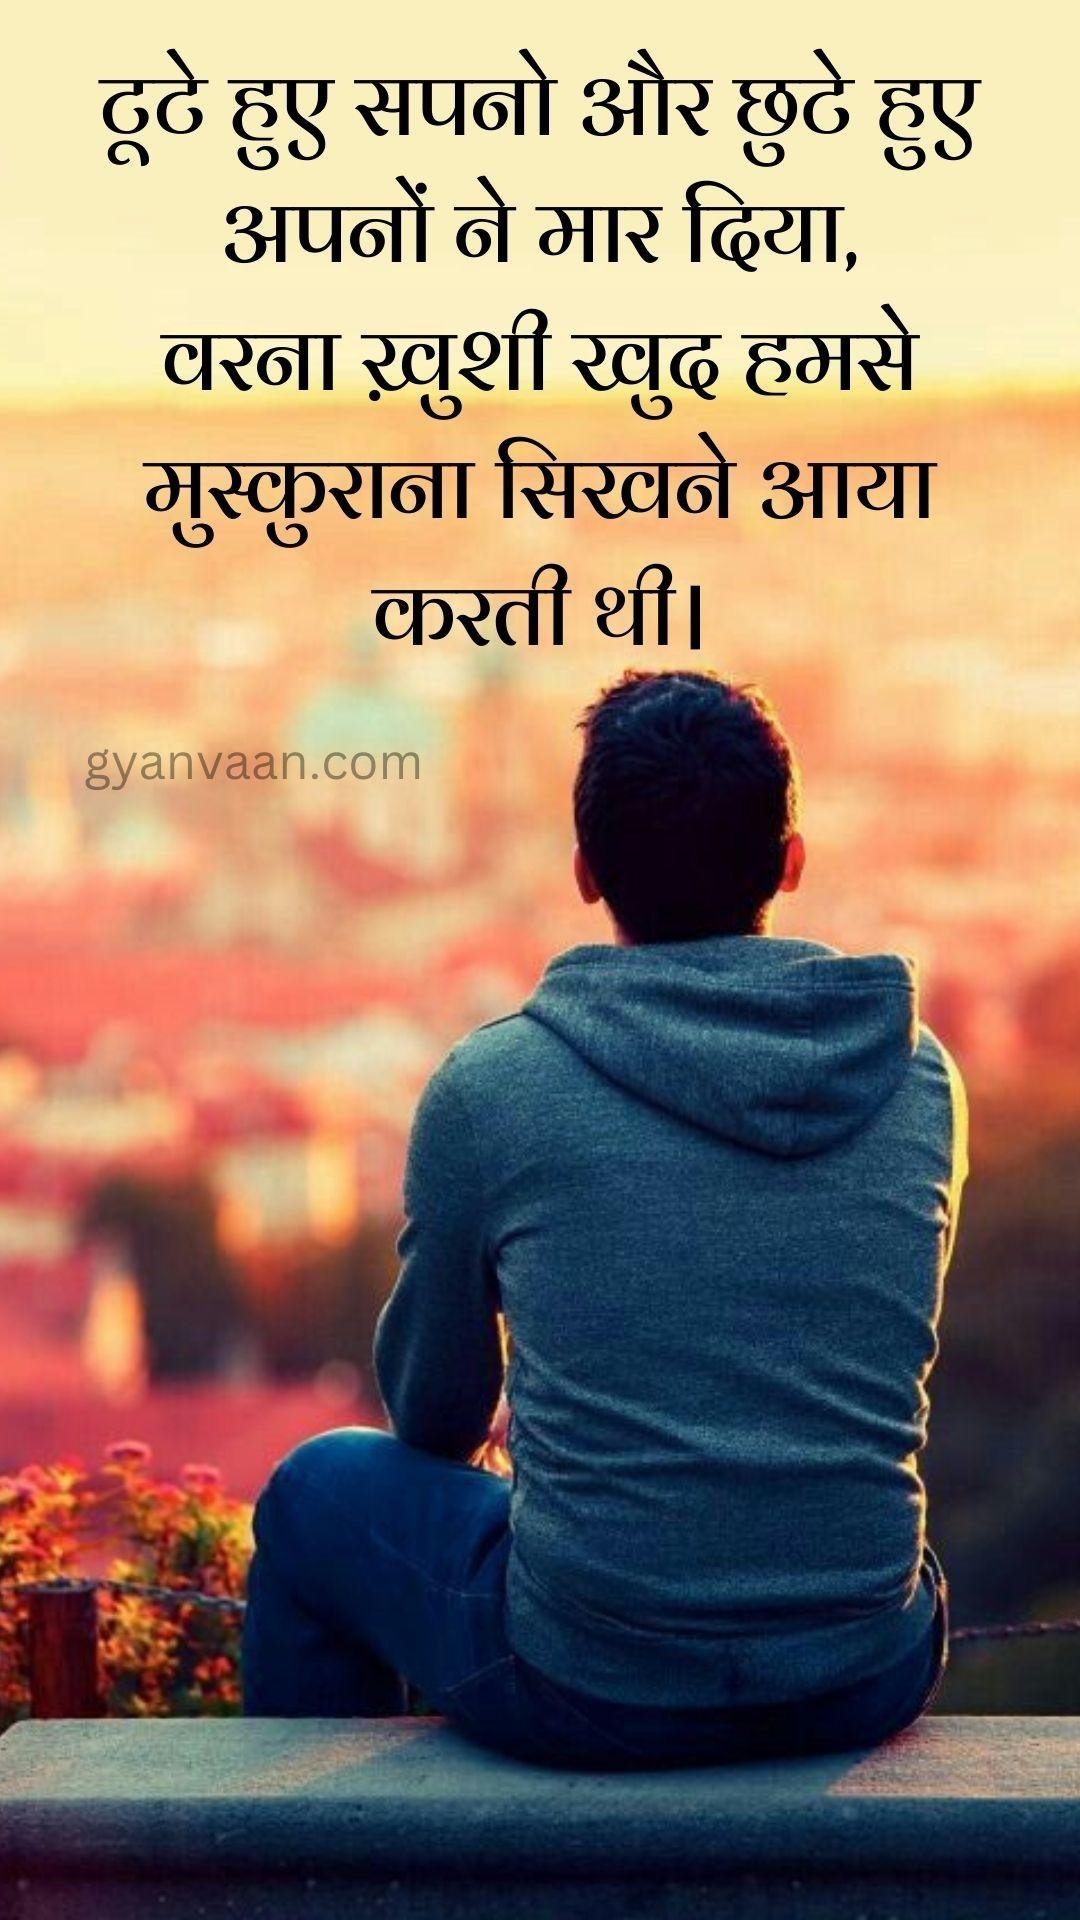 Very Heart Touching Sad Quotes In Hindi For Mobile Devices 3 - Very Heart Touching Sad Quotes In Hindi